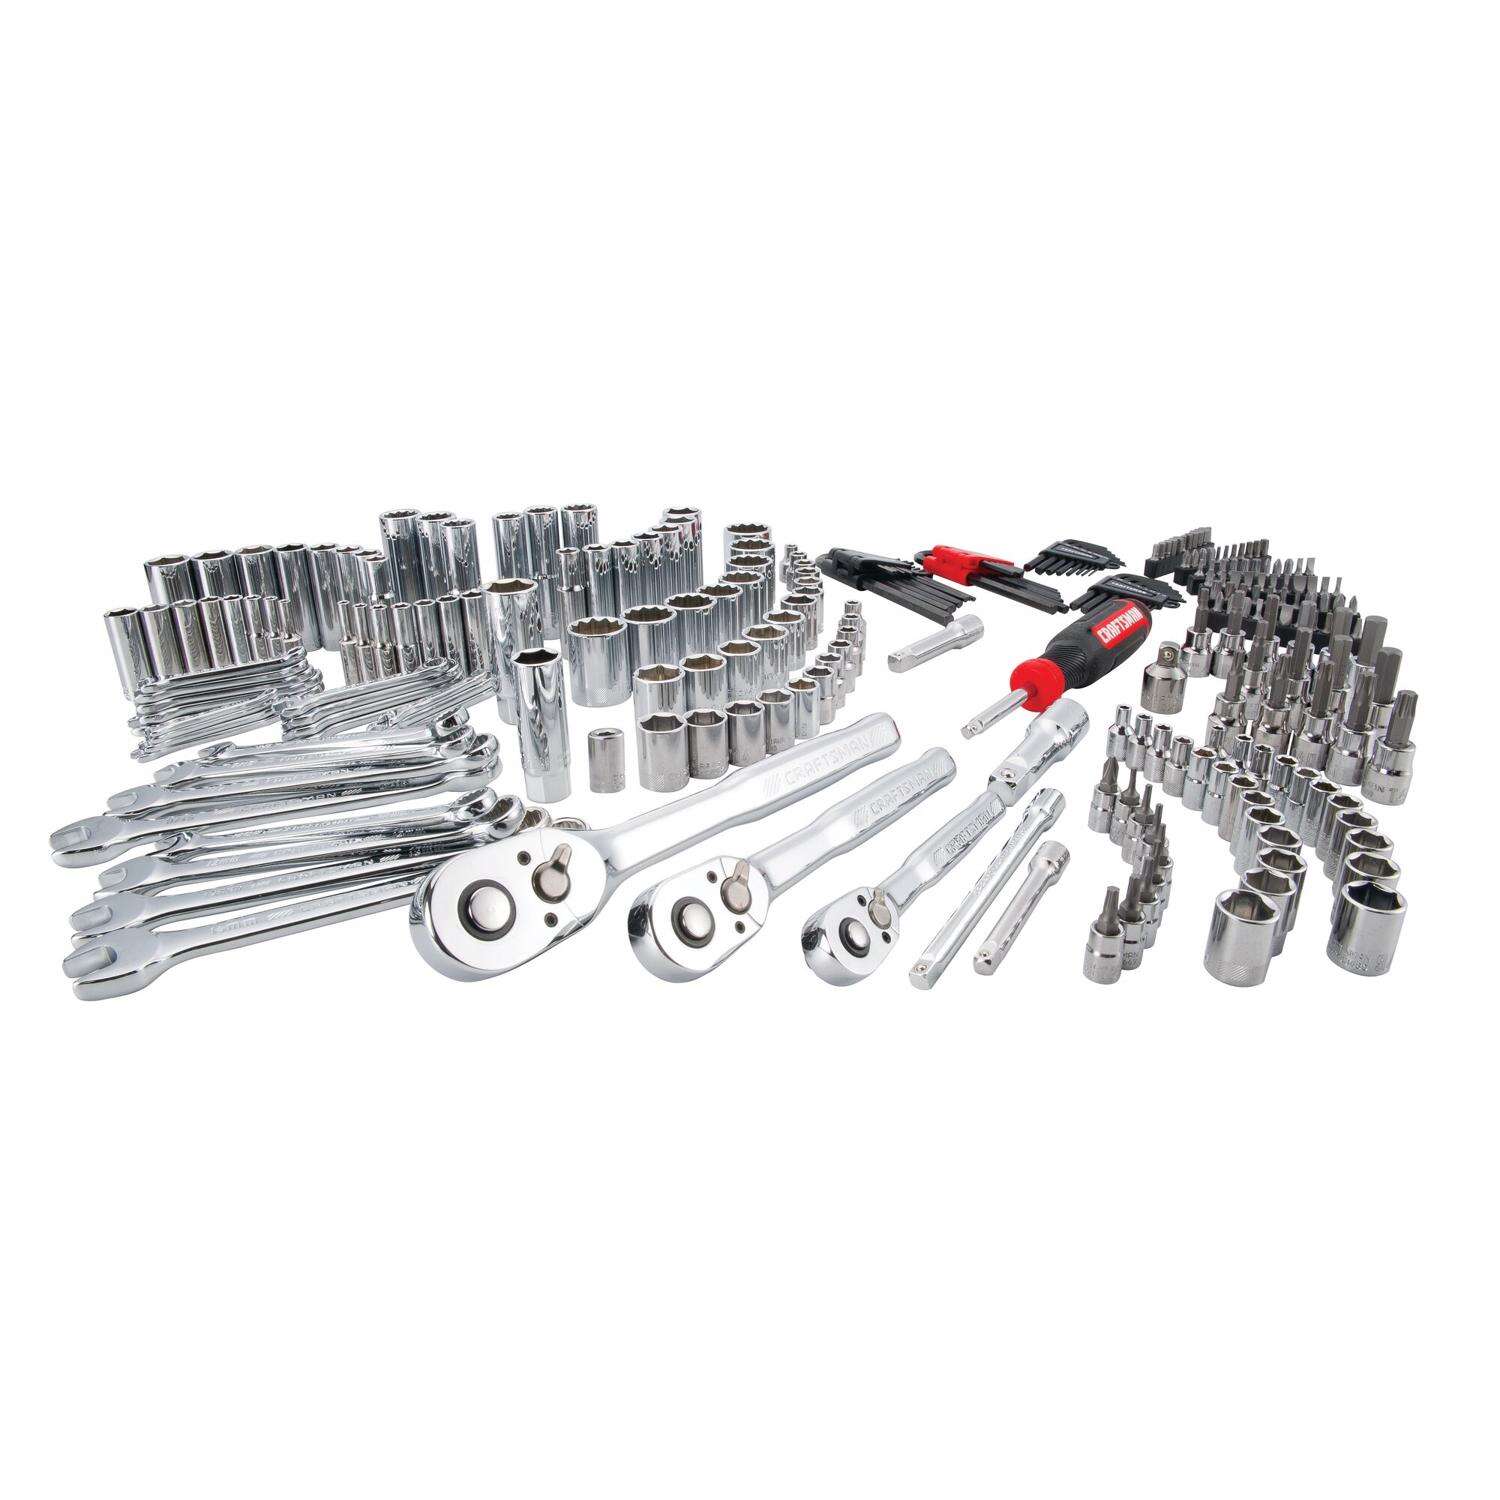 Craftsman Versastack 1/4, 3/8 and 1/2 in. drive S Metric and SAE Mechanic's Tool Set 262 pc